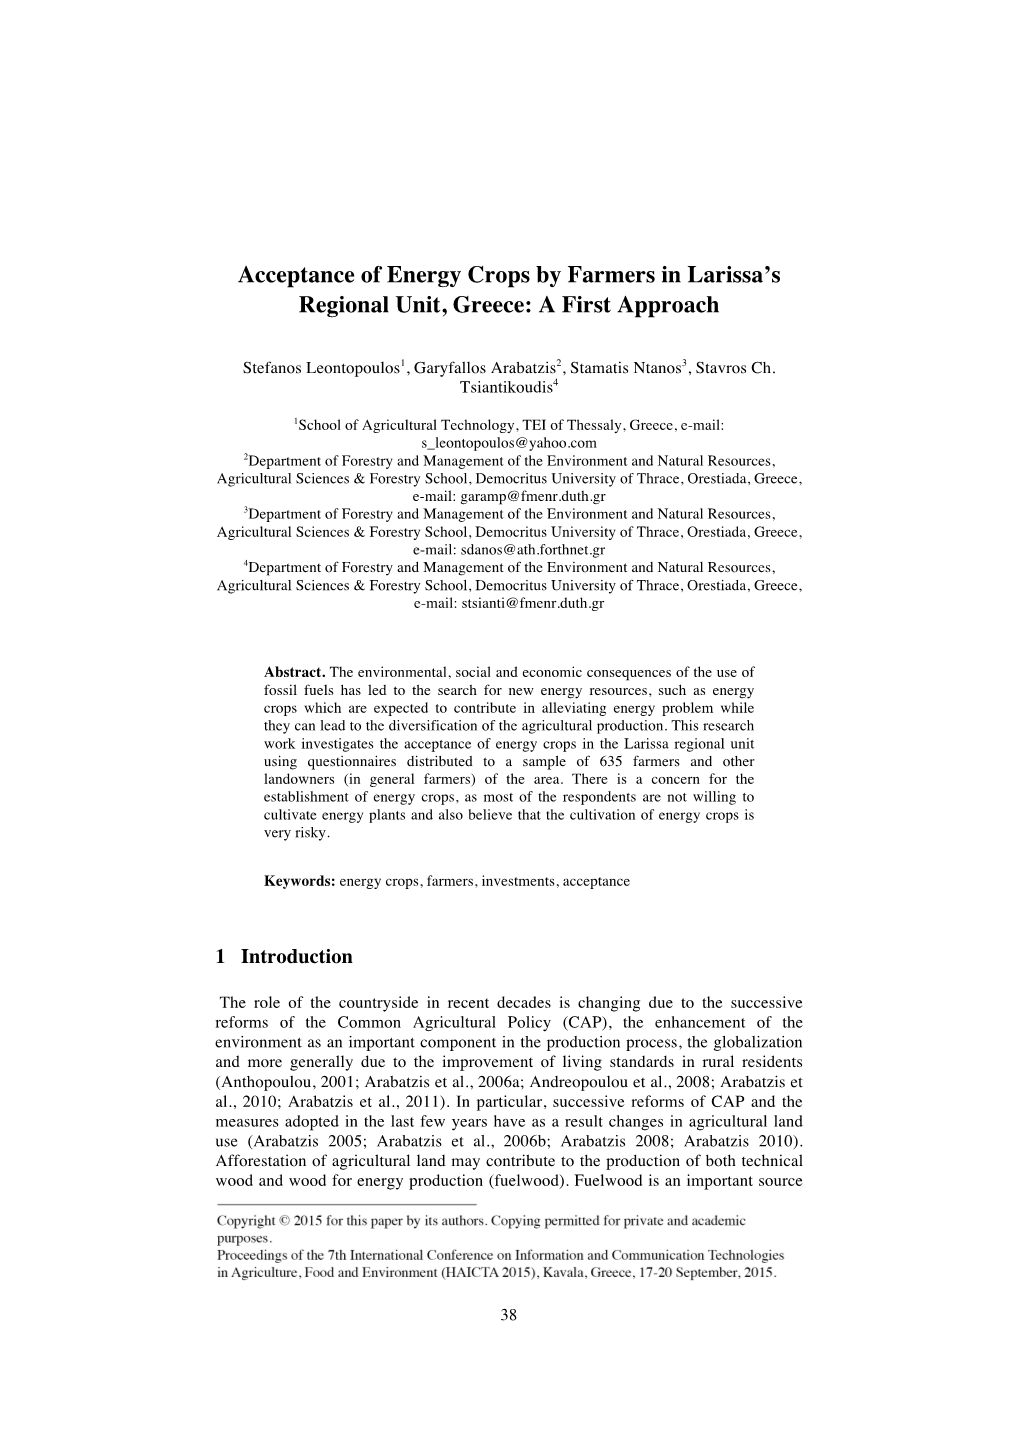 Acceptance of Energy Crops by Farmers in Larissa's Regional Unit, Greece: a First Approach